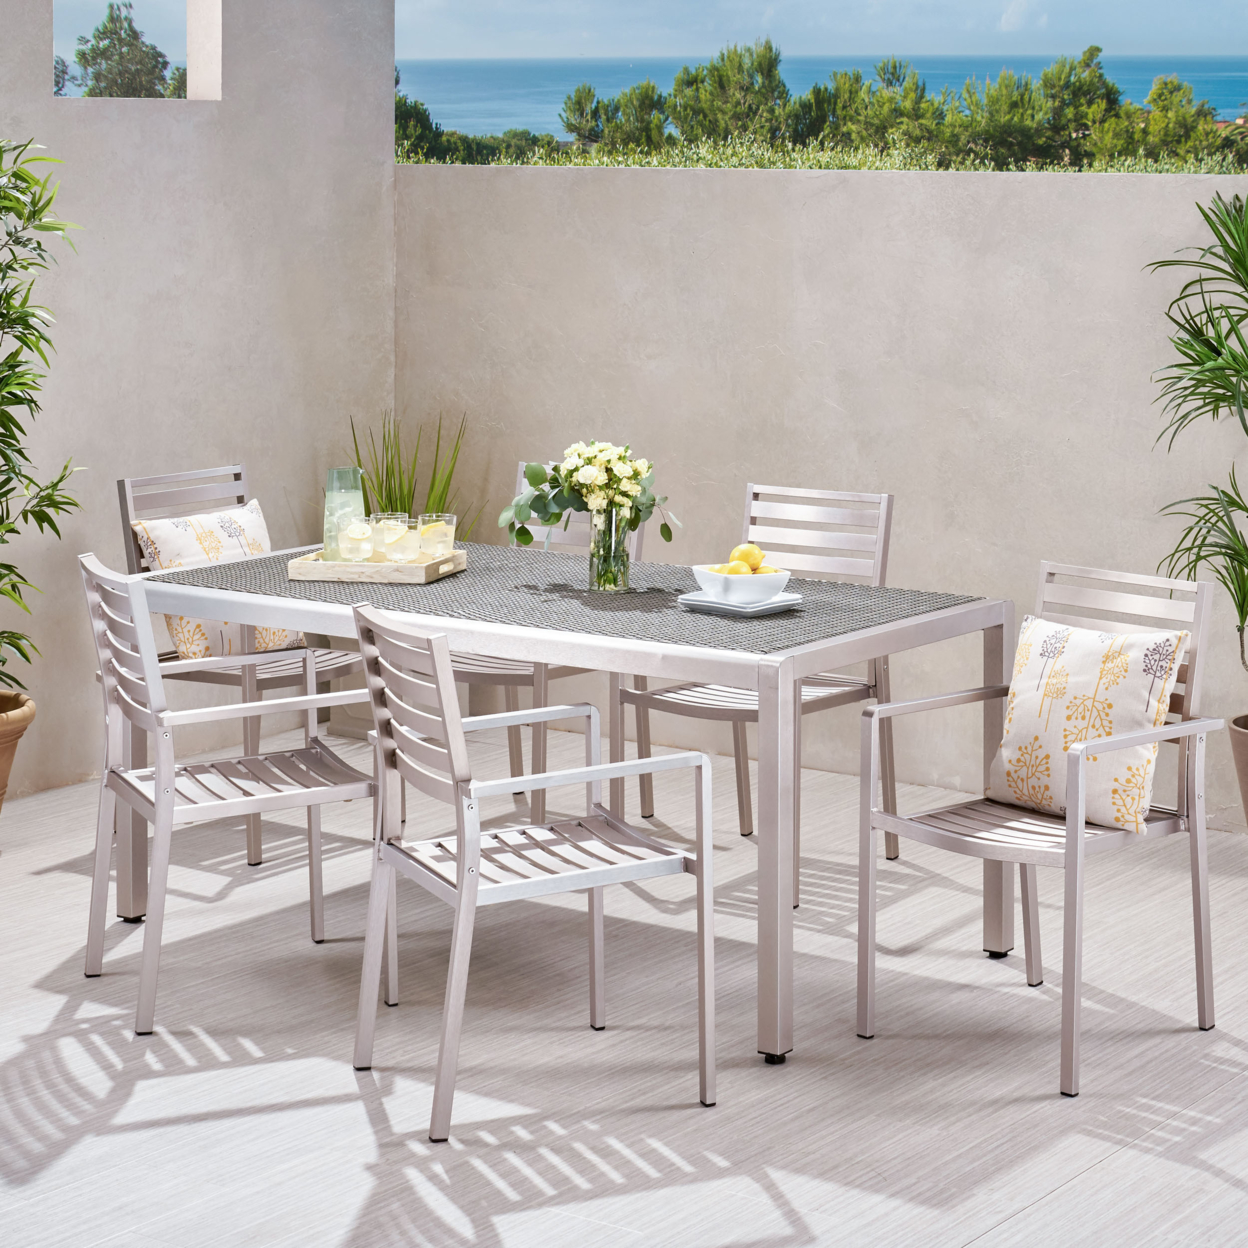 Beenle Outdoor Modern 6 Seater Aluminum Dining Set With Wicker Table Top - Alu + Pe